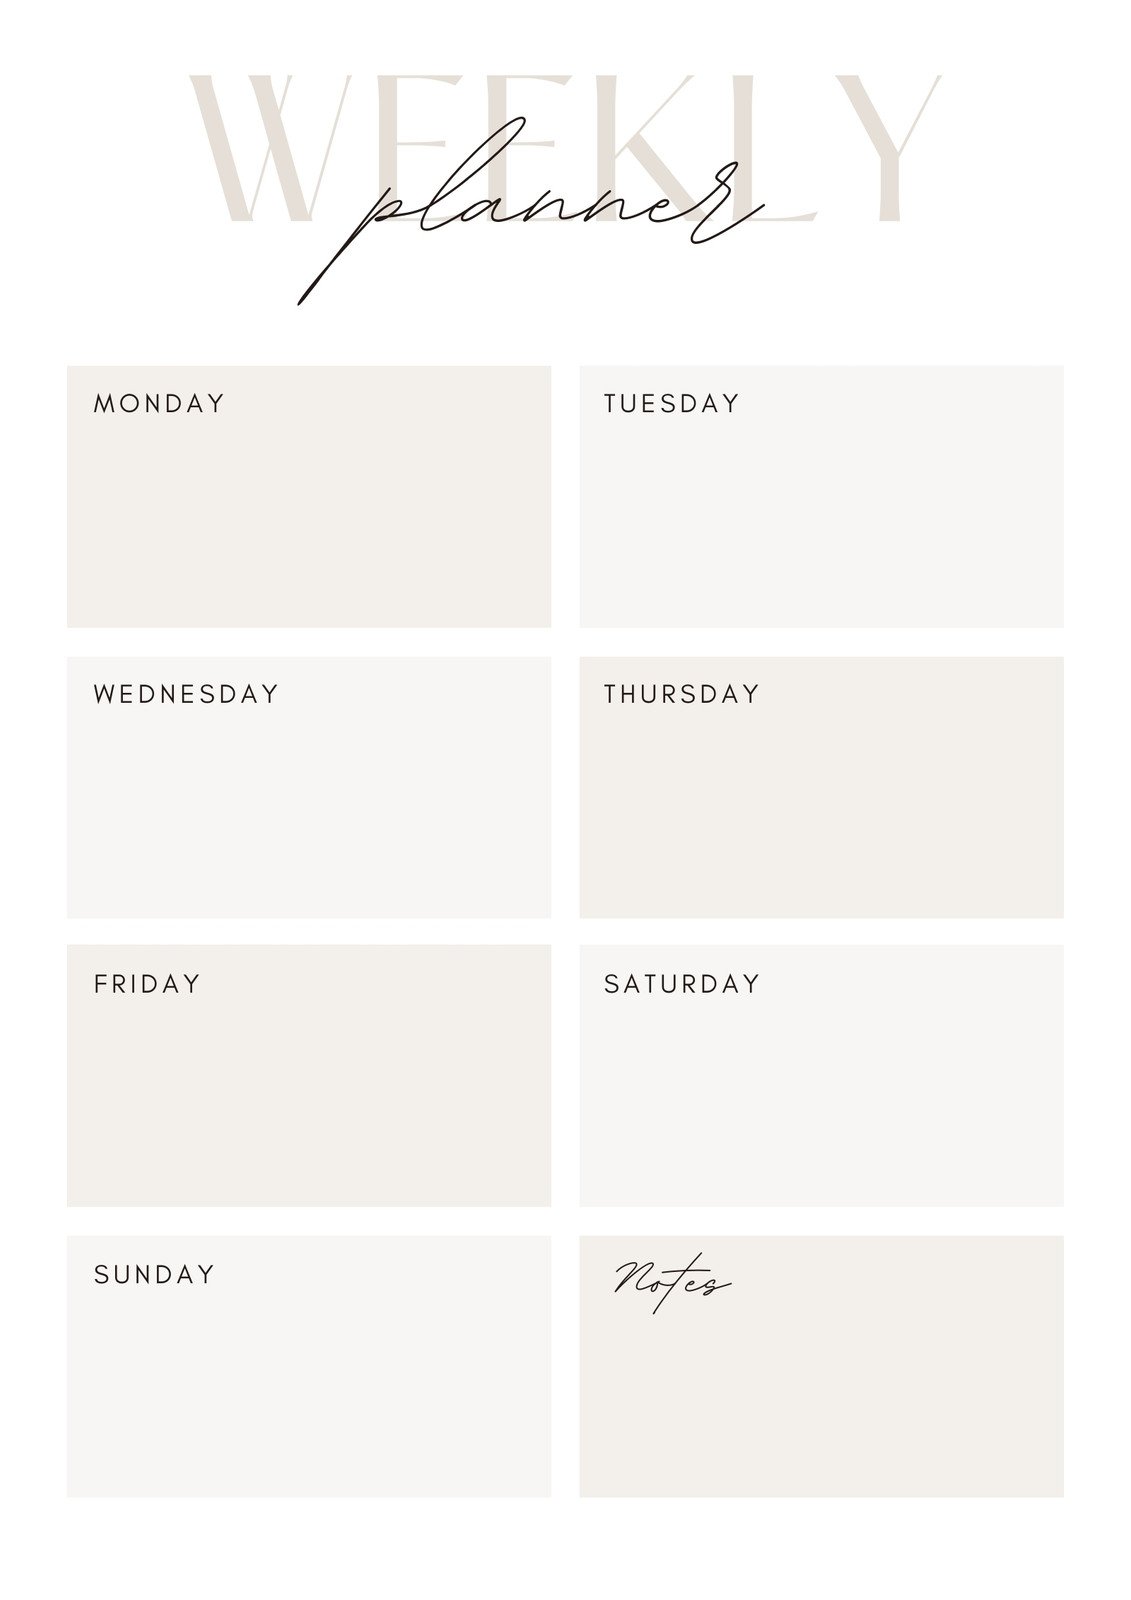 Relationship journal Canva Editable Templates. - Planners weekly